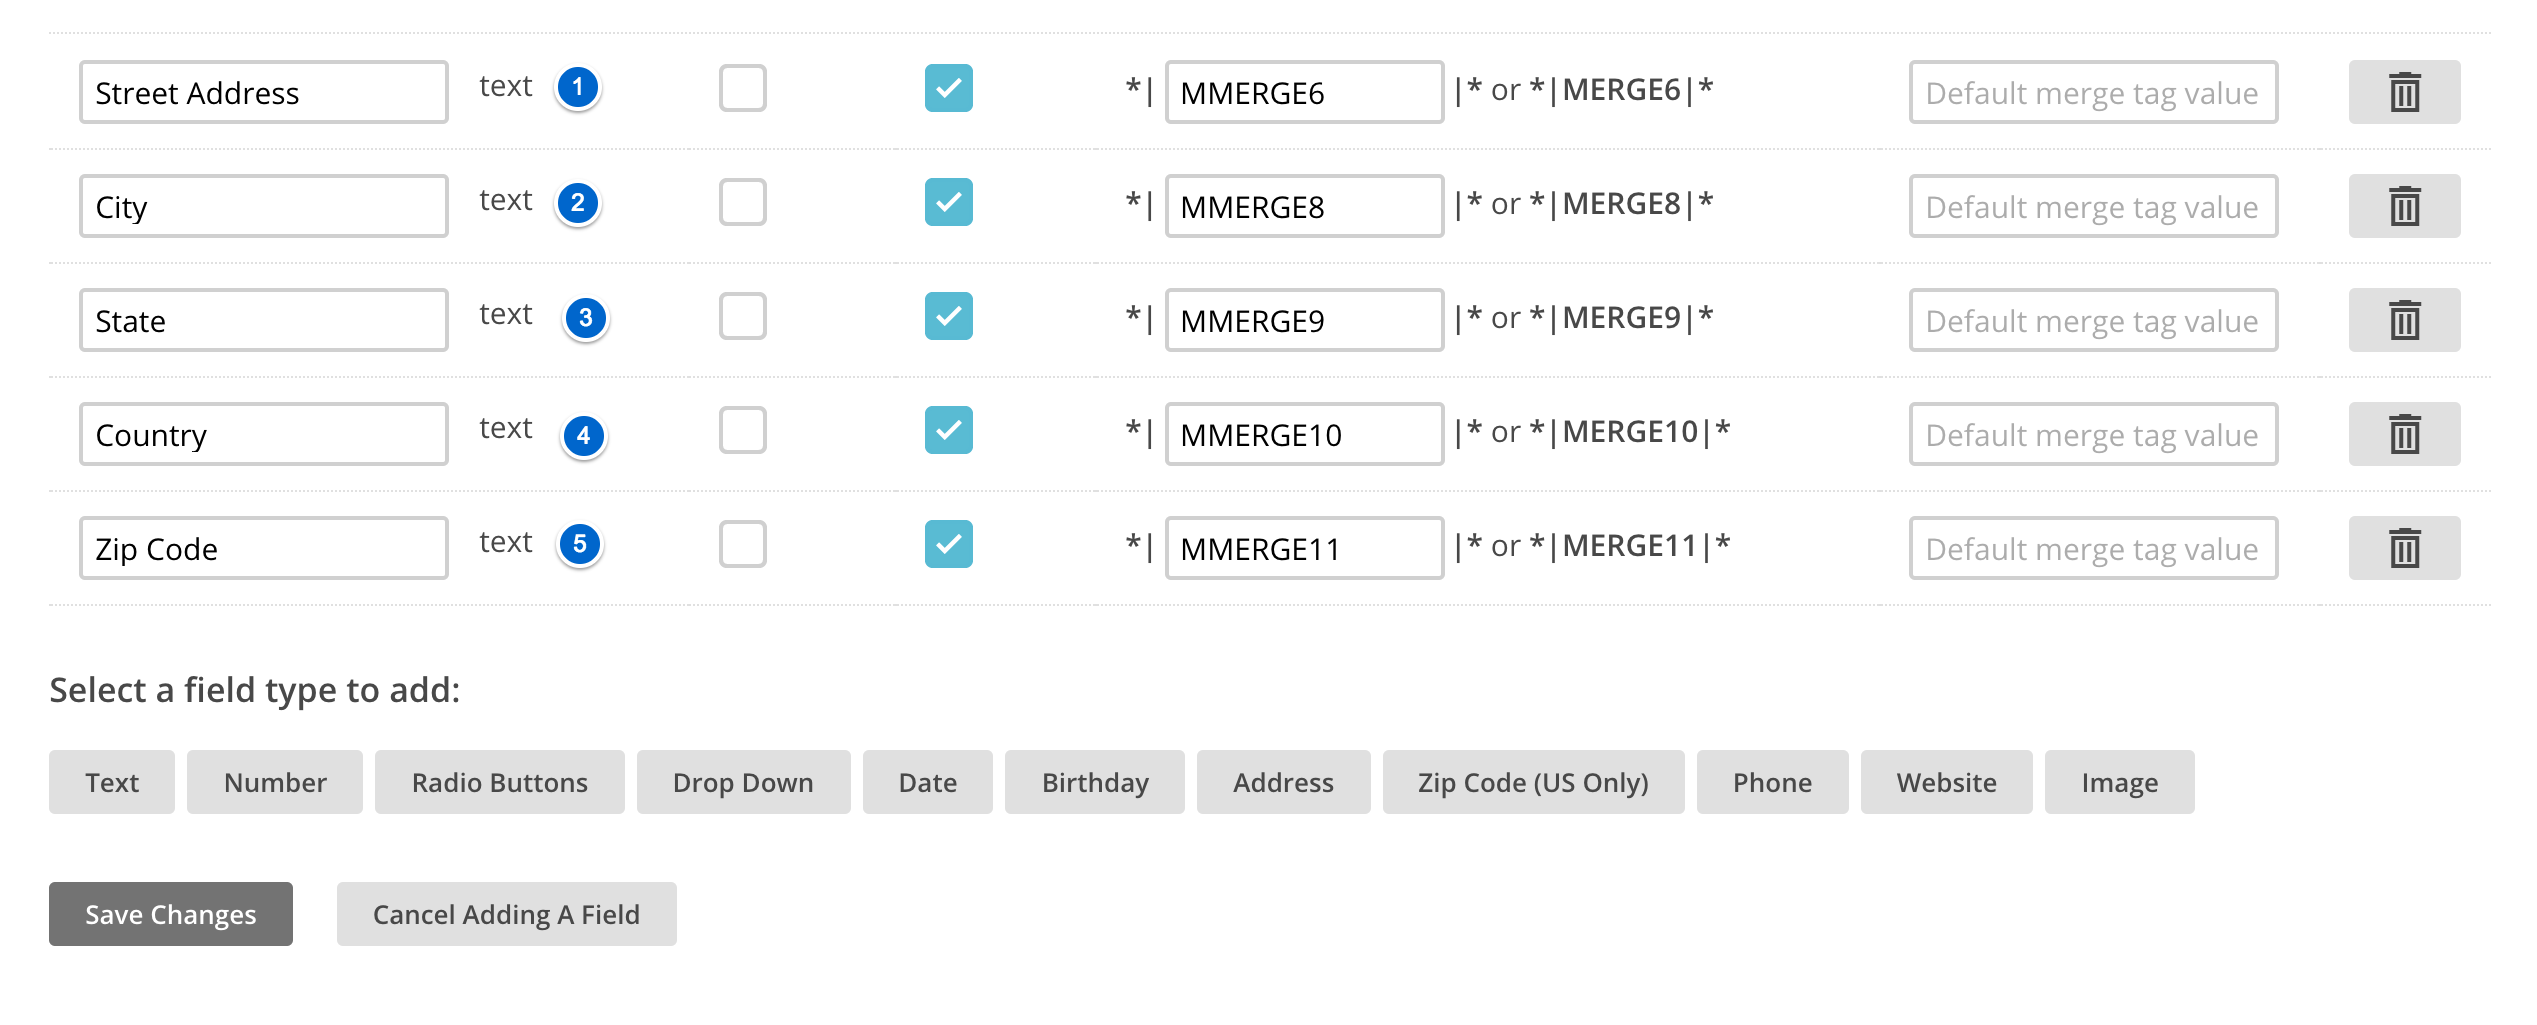 List_Fields_and___MERGE___Tags_for_Unit_Test___MailChimp.png